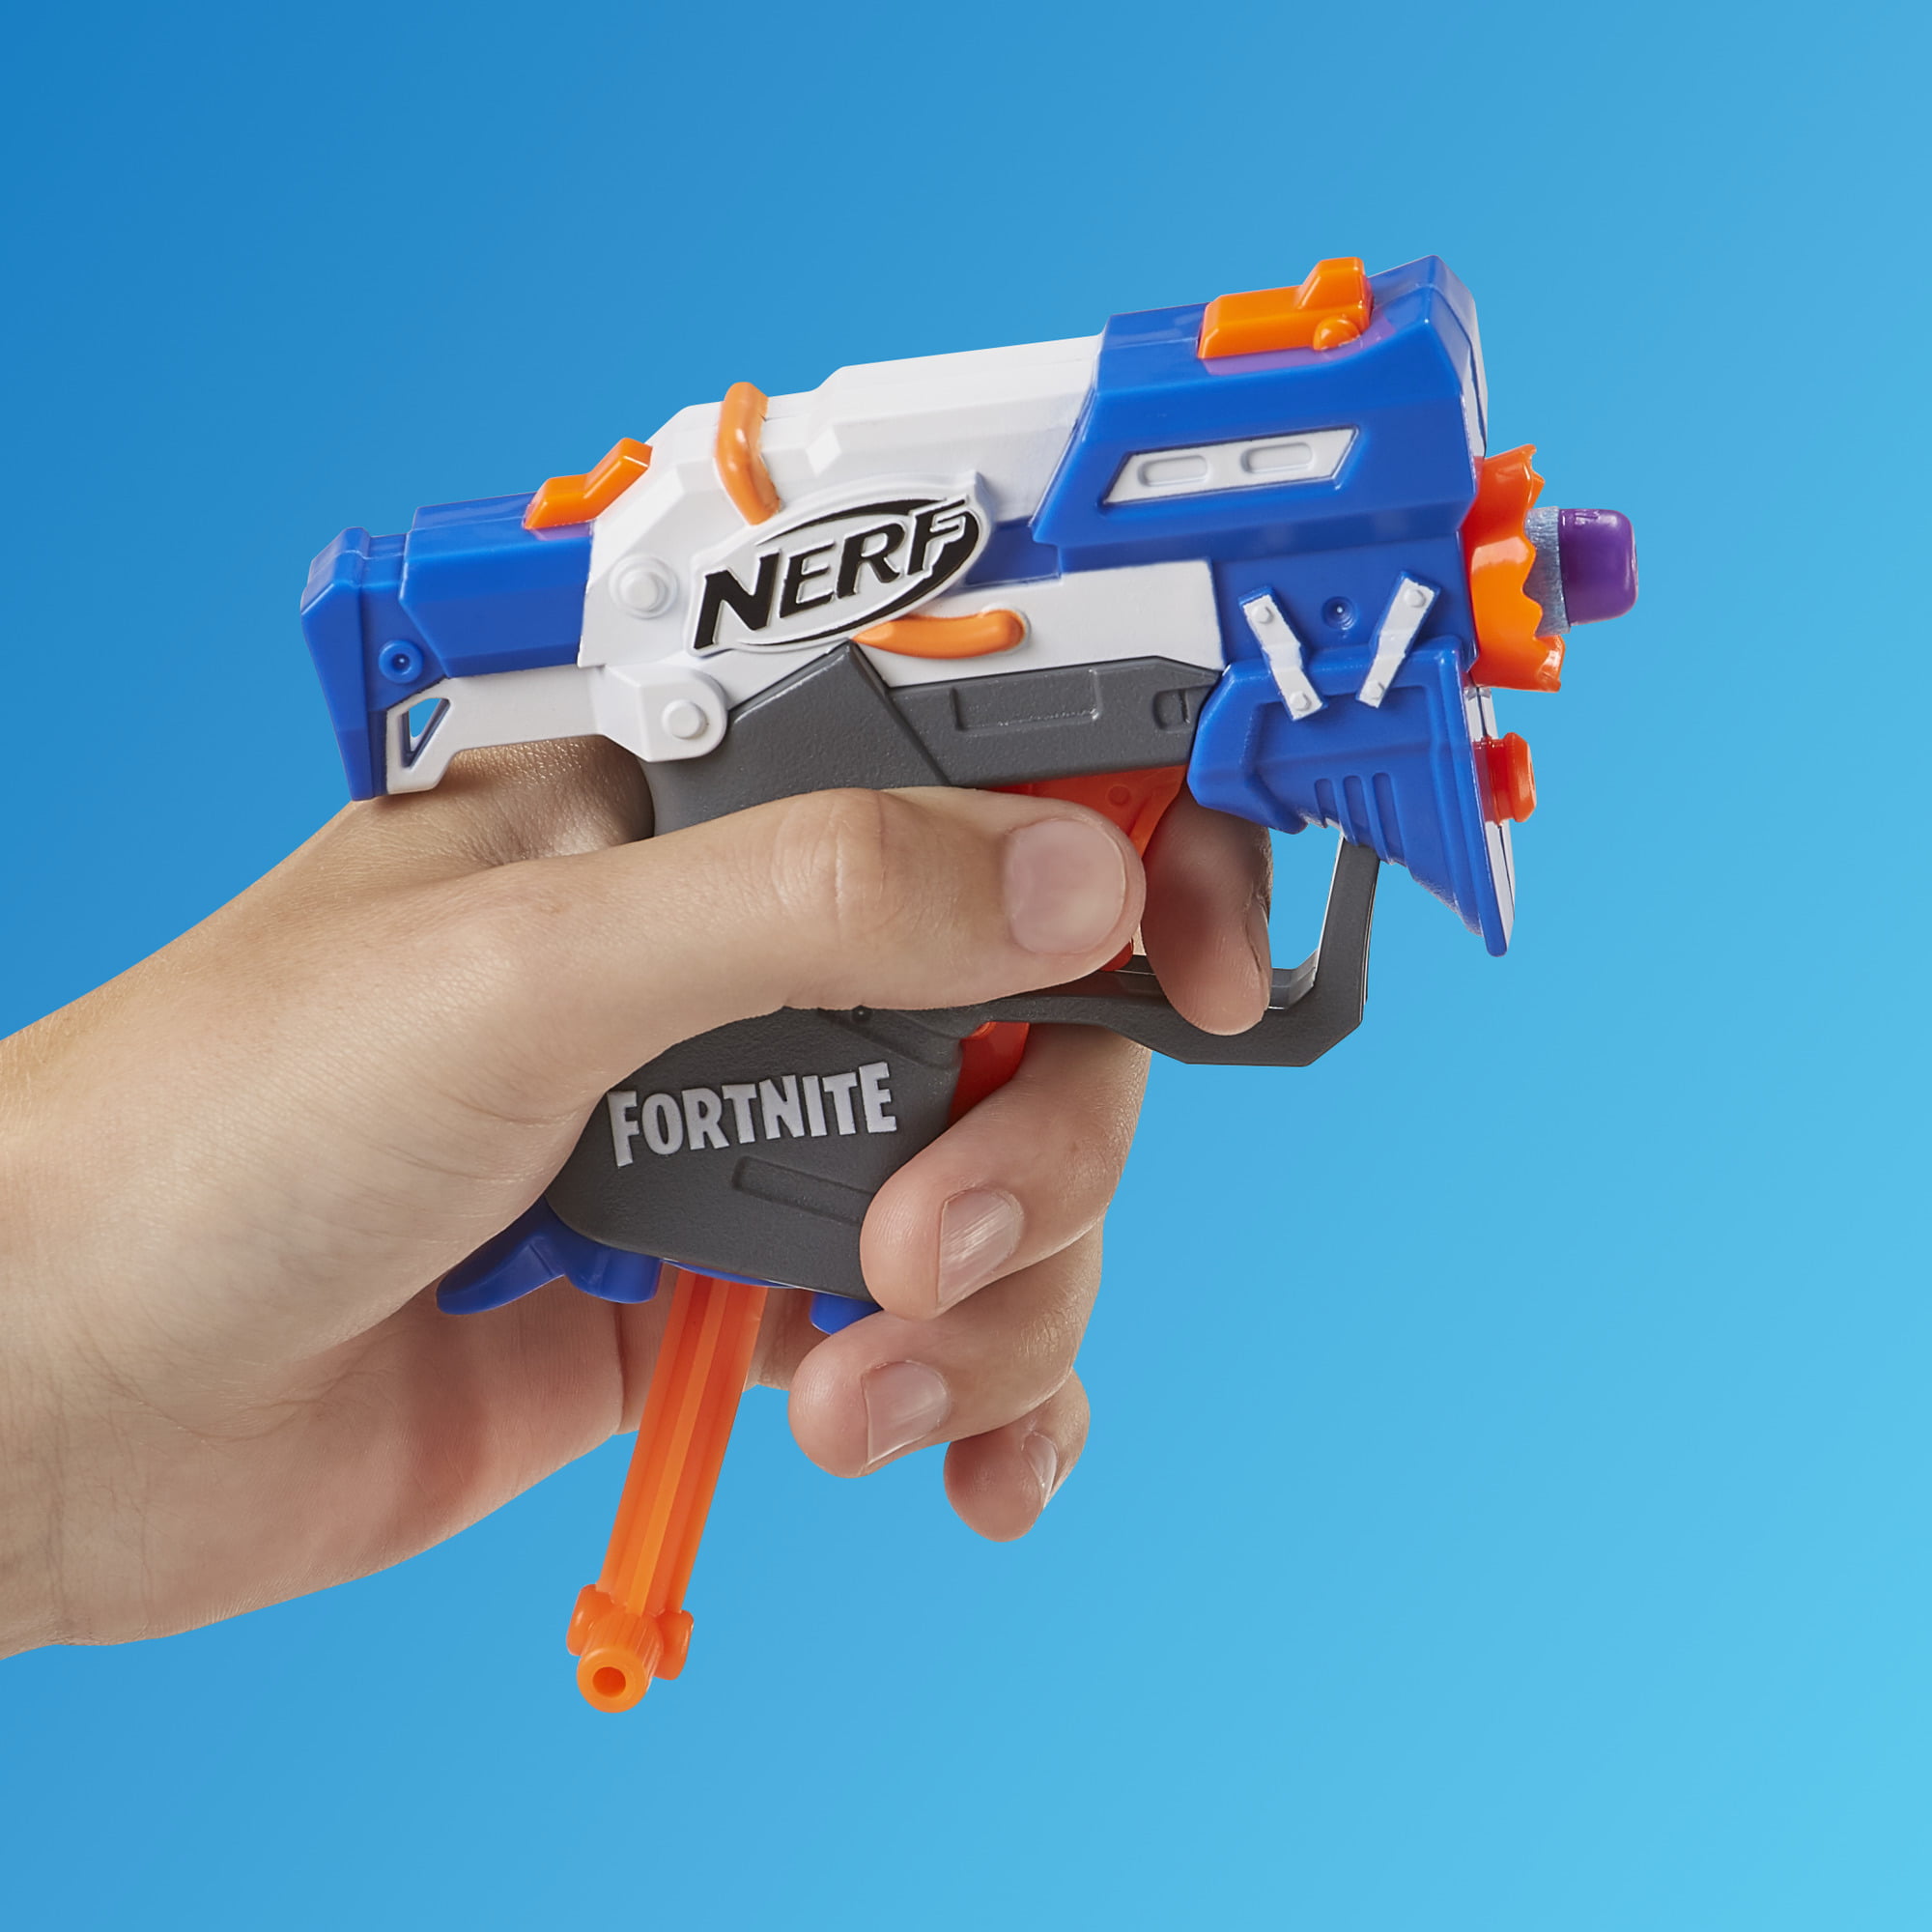 Teens Adults Includes 3 Blasters and 6 Official Nerf Elite Darts for Kids Nerf Fortnite 3 Dart-Firing Micro Trio